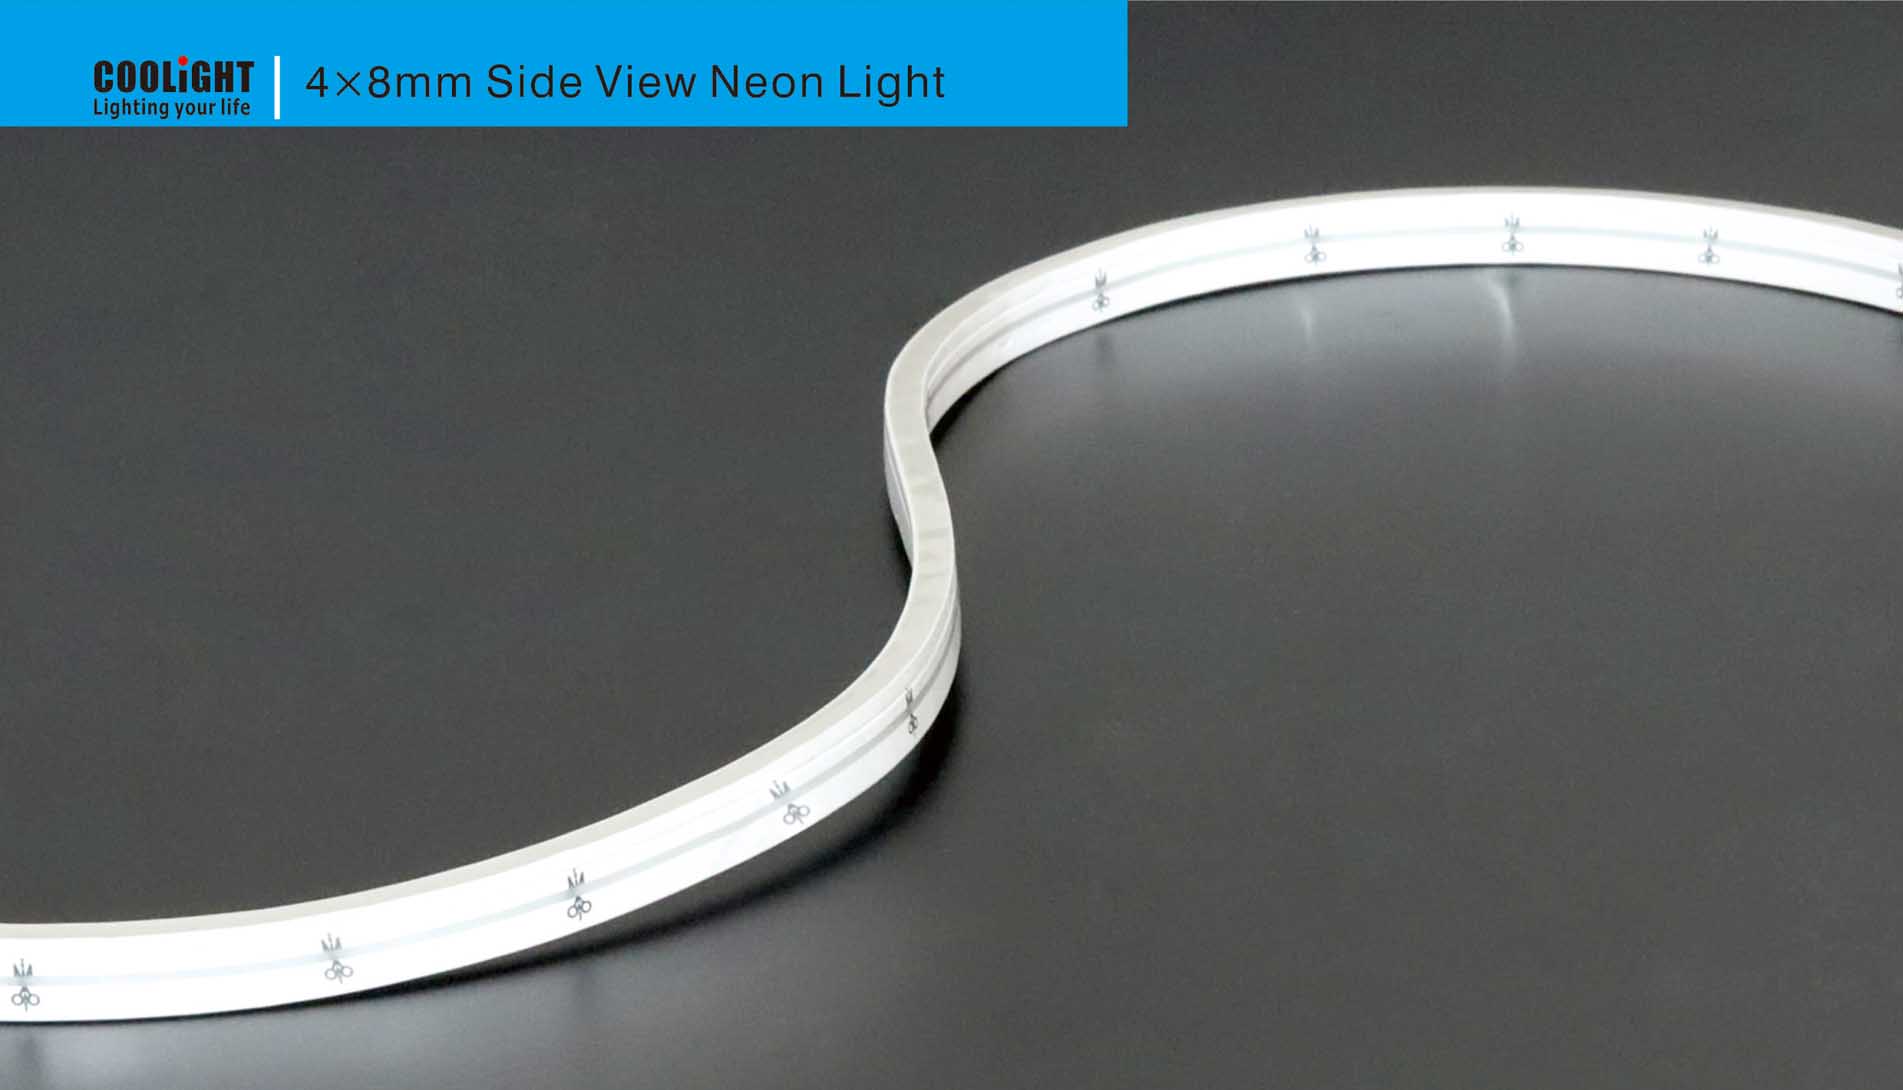 4x8mm 144led side view neon light